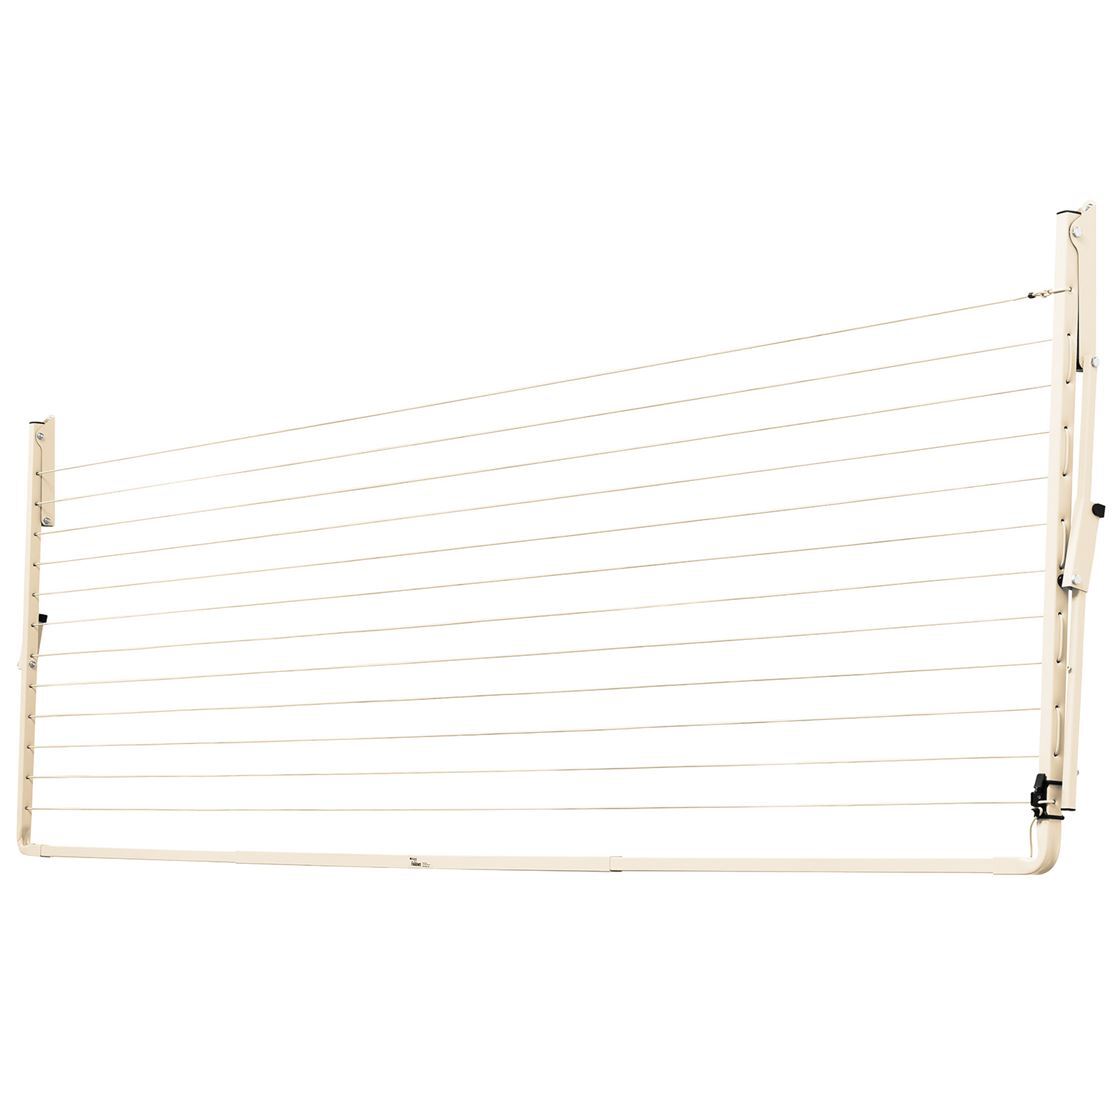 Austral Fold Down Clothesline Single Compact39 Classic Cream